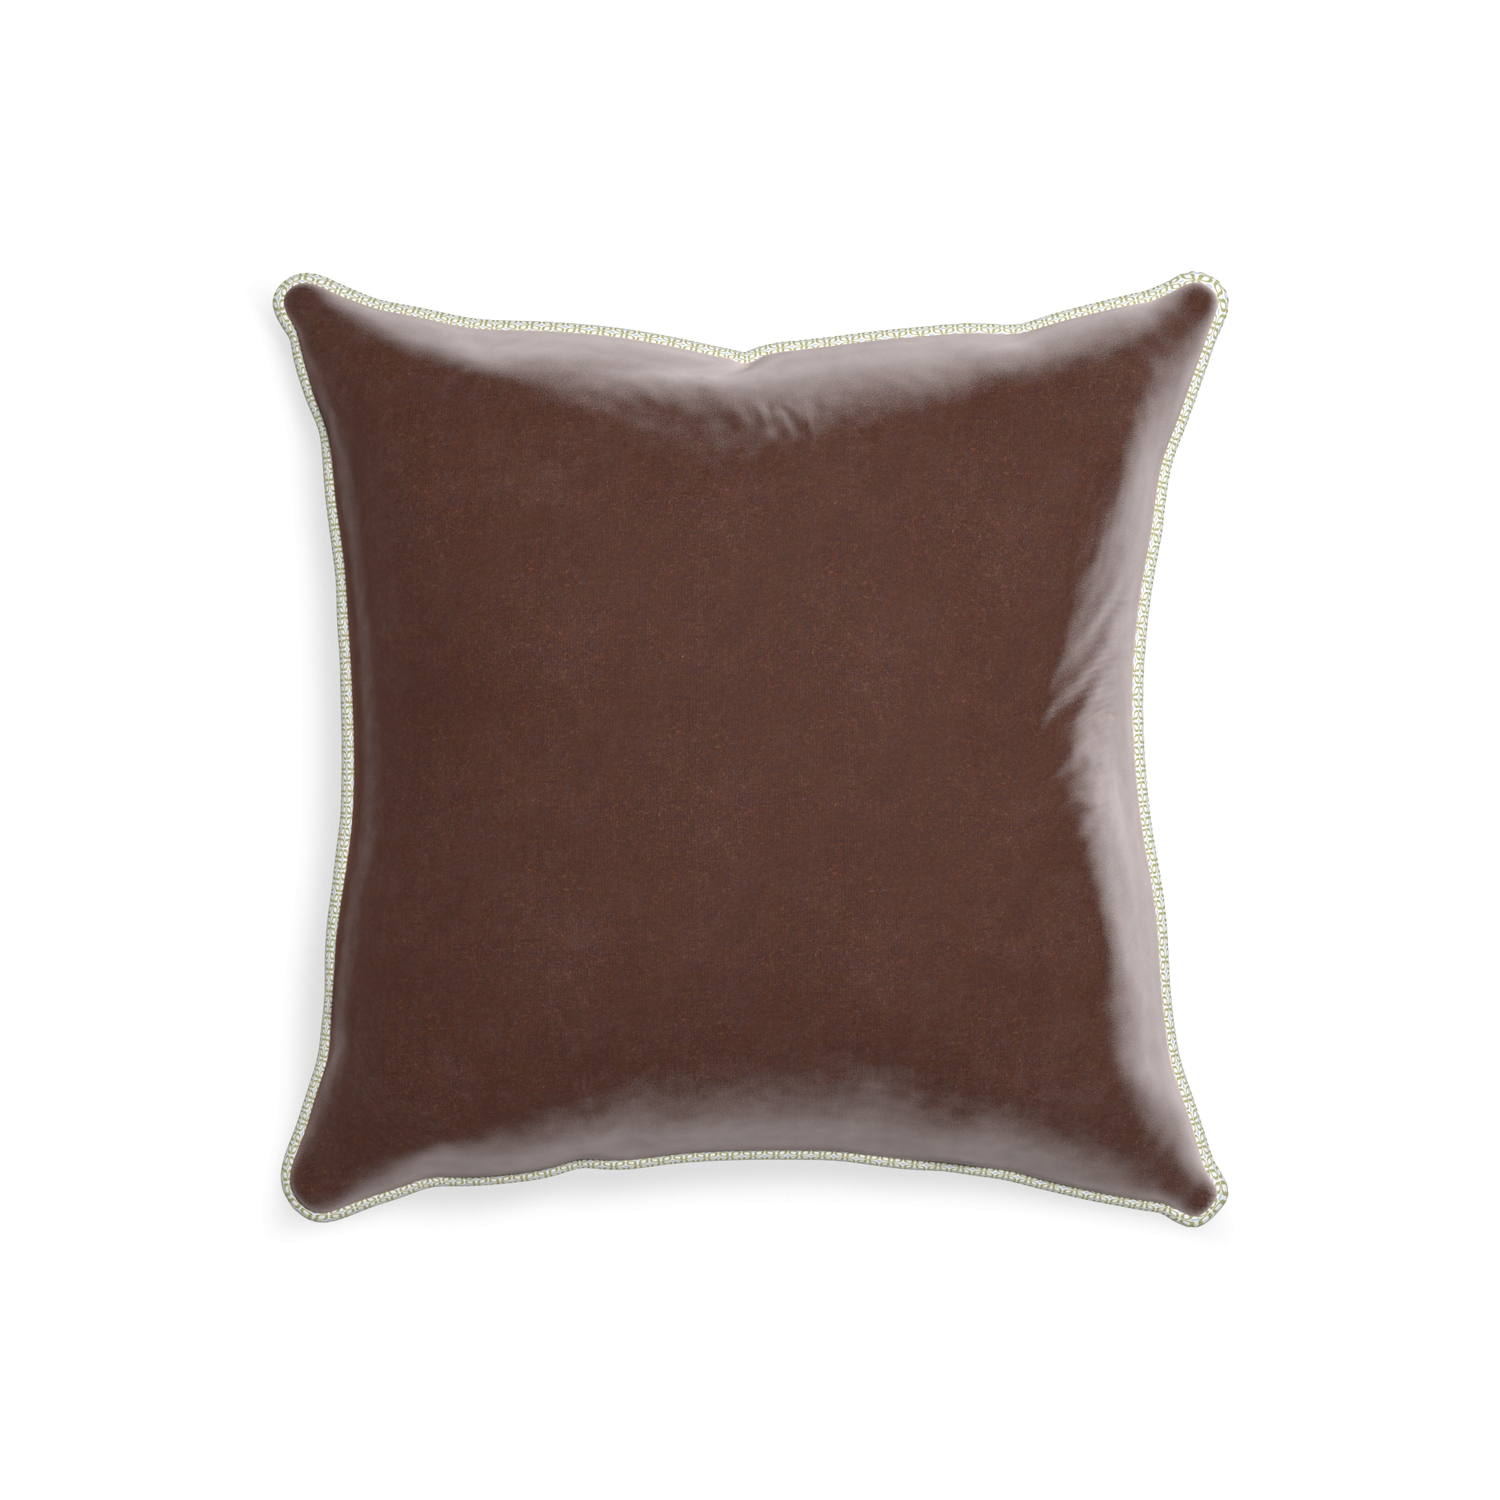 20-square walnut velvet custom pillow with l piping on white background